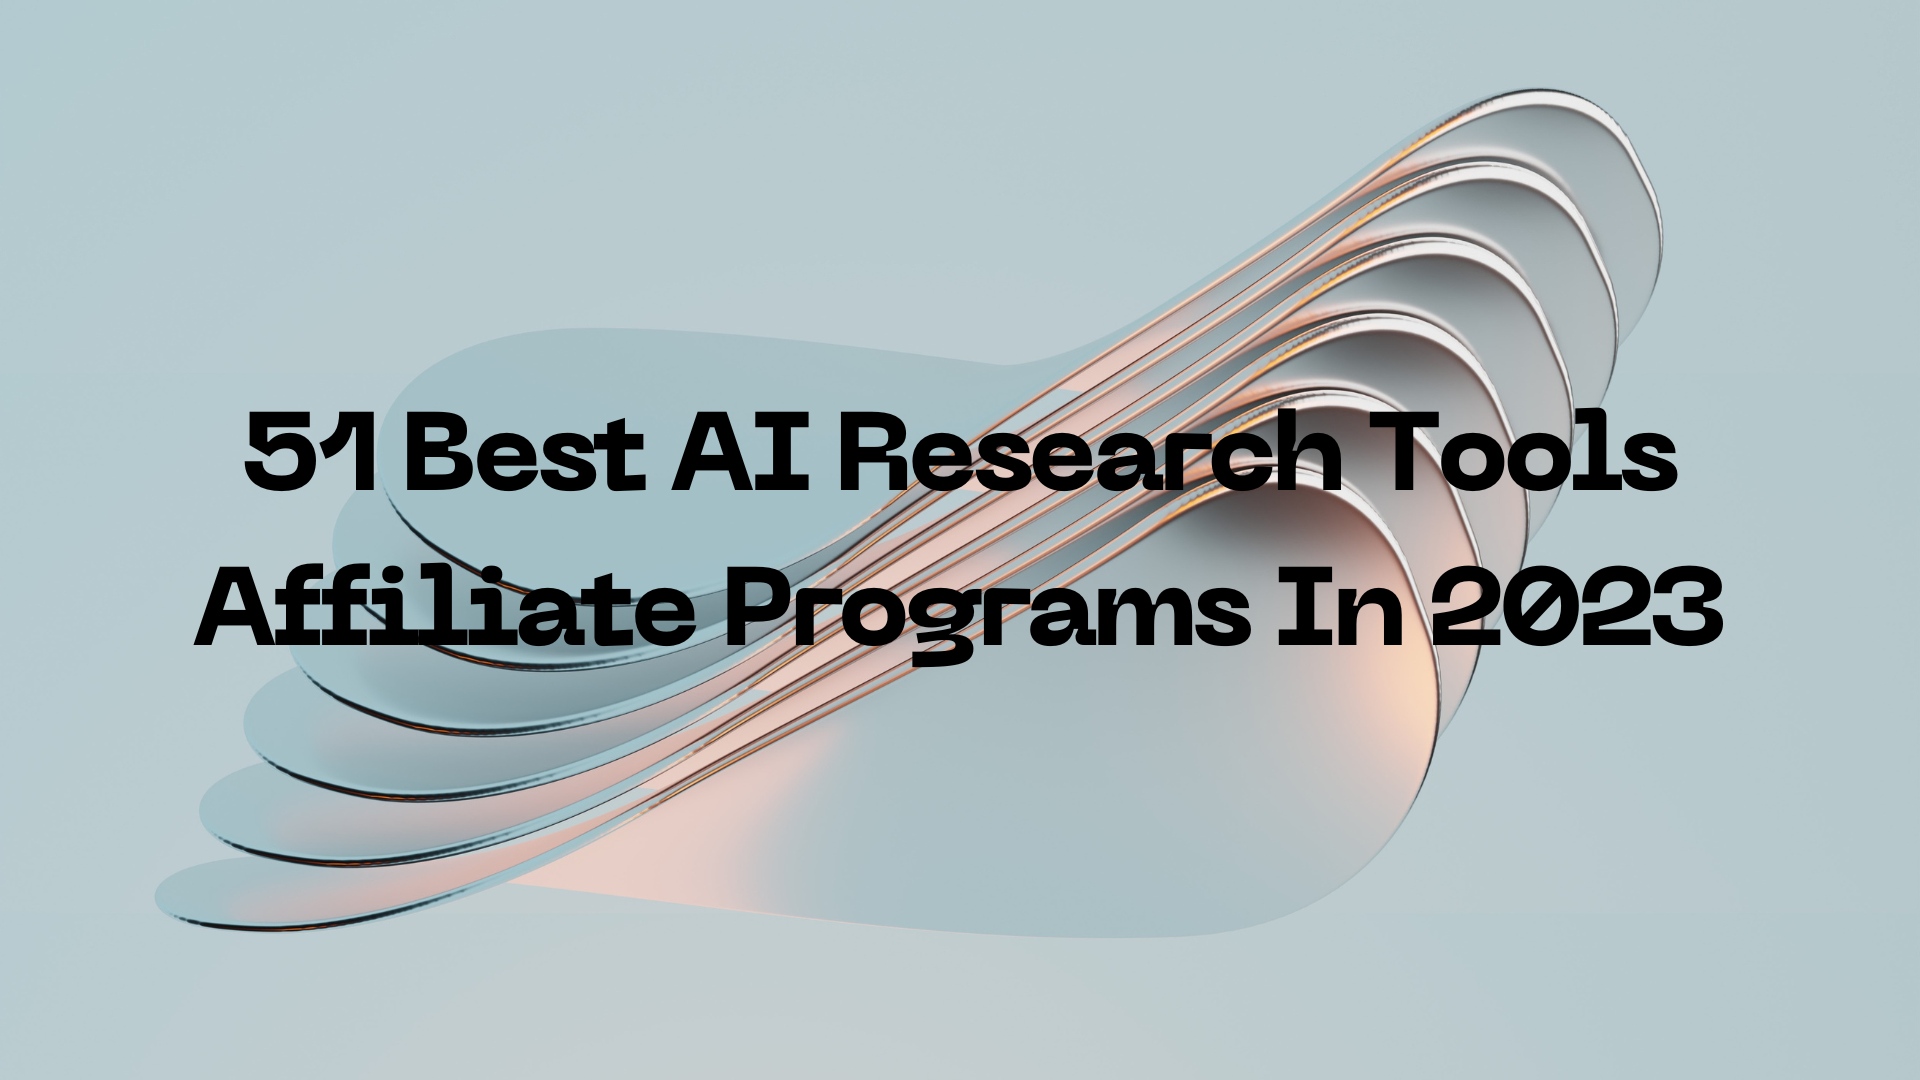 51 Best AI Research Tools Affiliate Programs In 2023